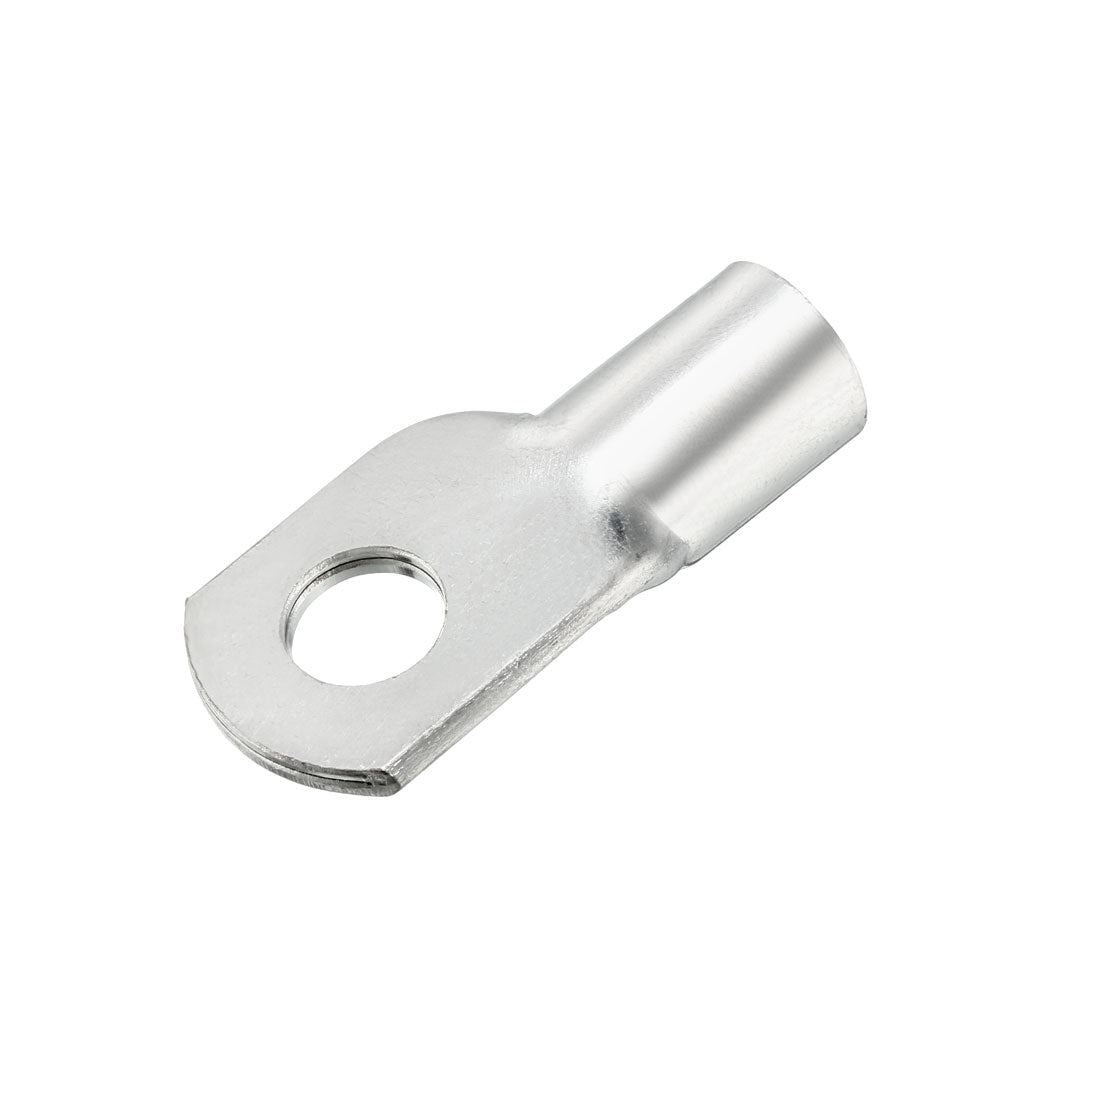 uxcell Uxcell 10Pcs SC70-10 Non-Insulated U-Type Copper Crimp Terminals 50mm Wire Connector Silver Tone